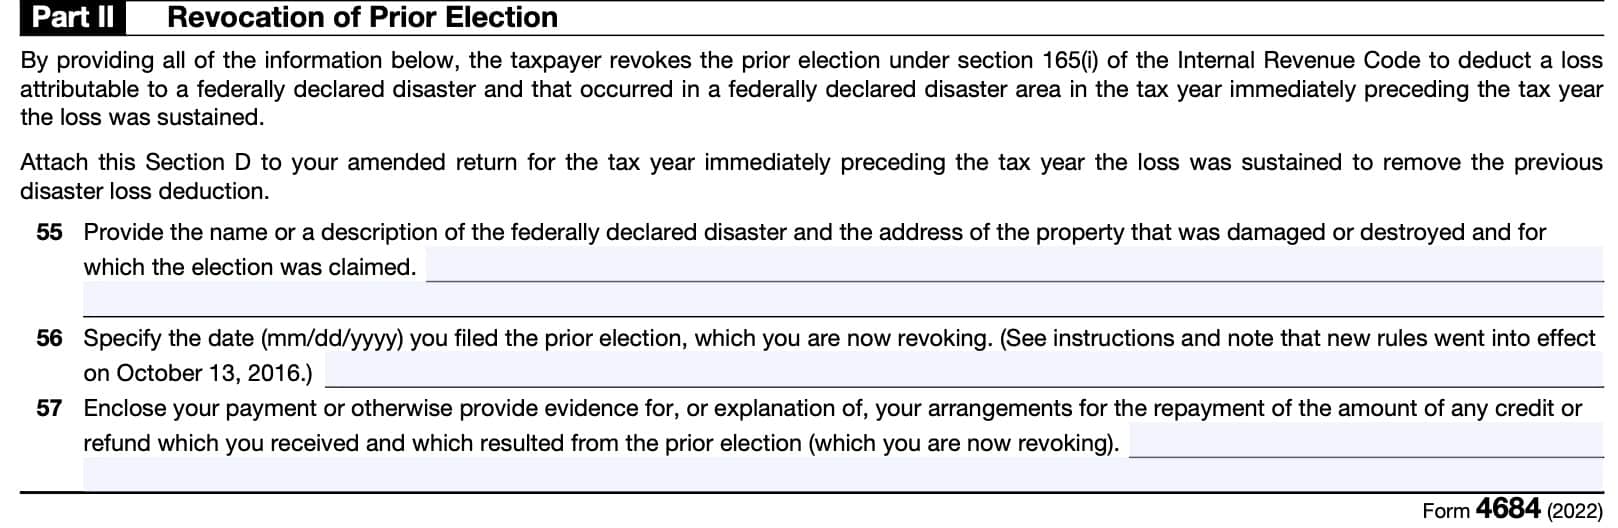 section d, part ii: revocation of prior election